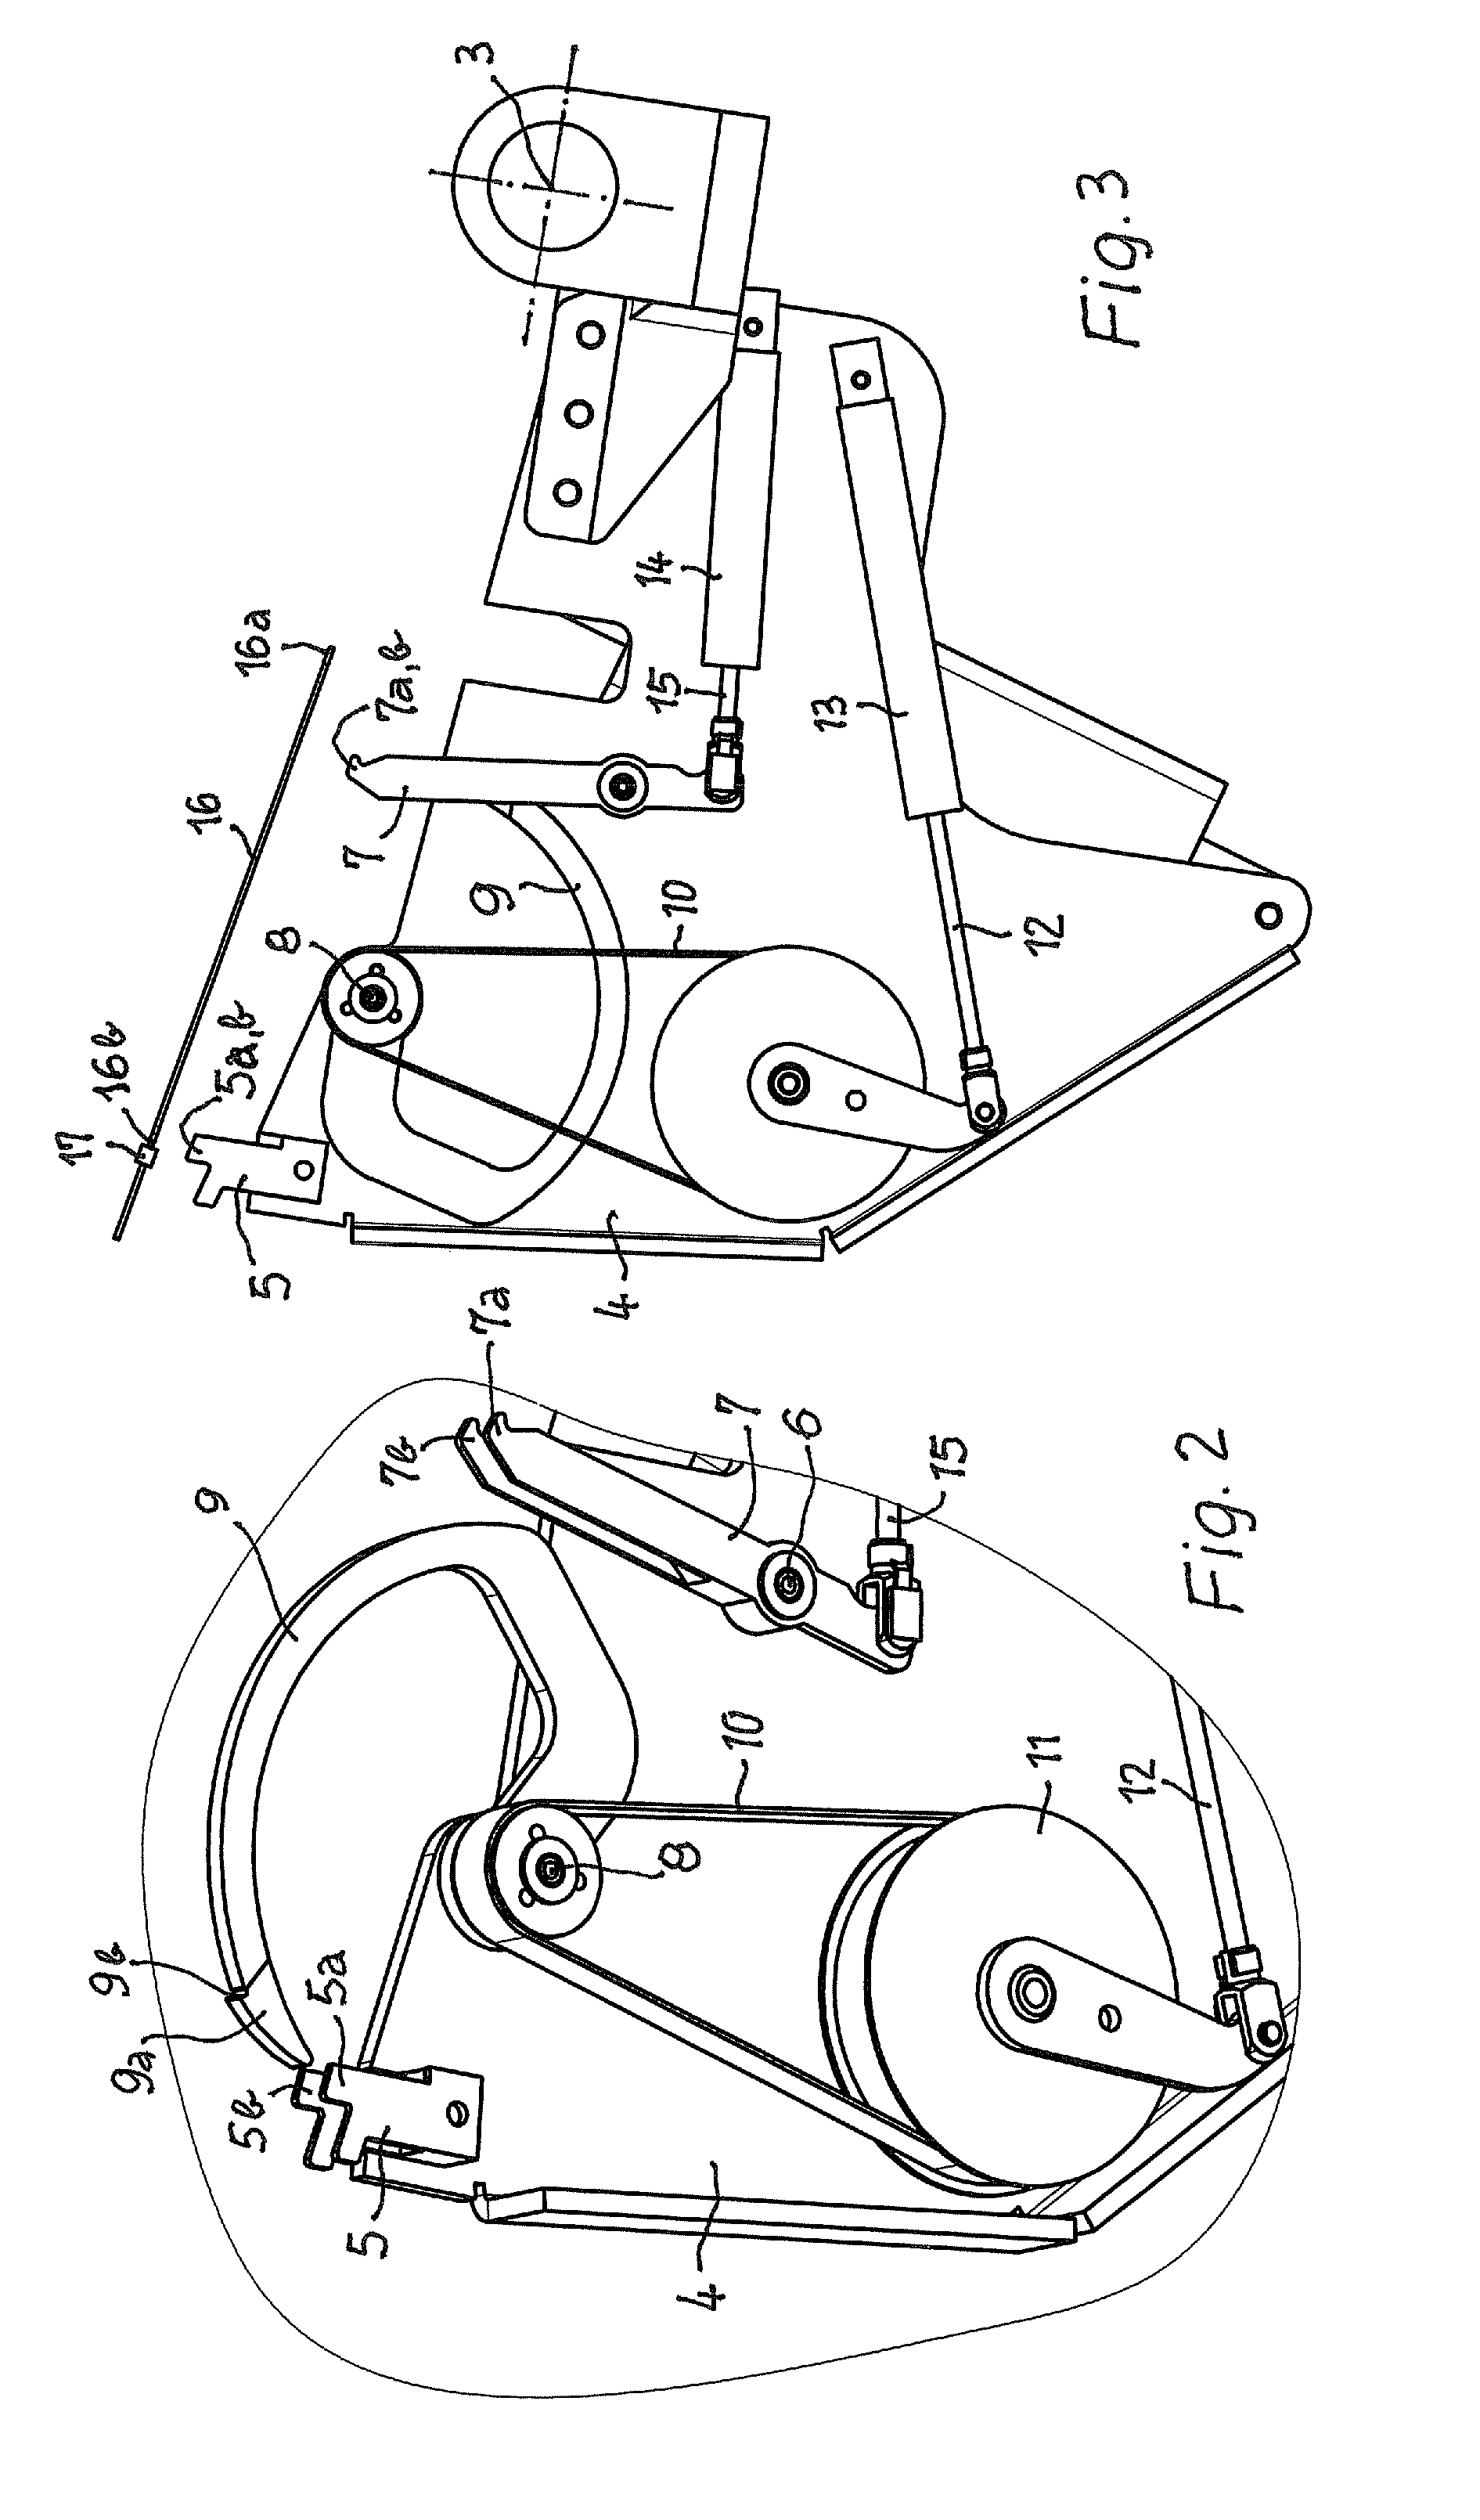 Portion pack with a suspension loop and method and device for attaching it